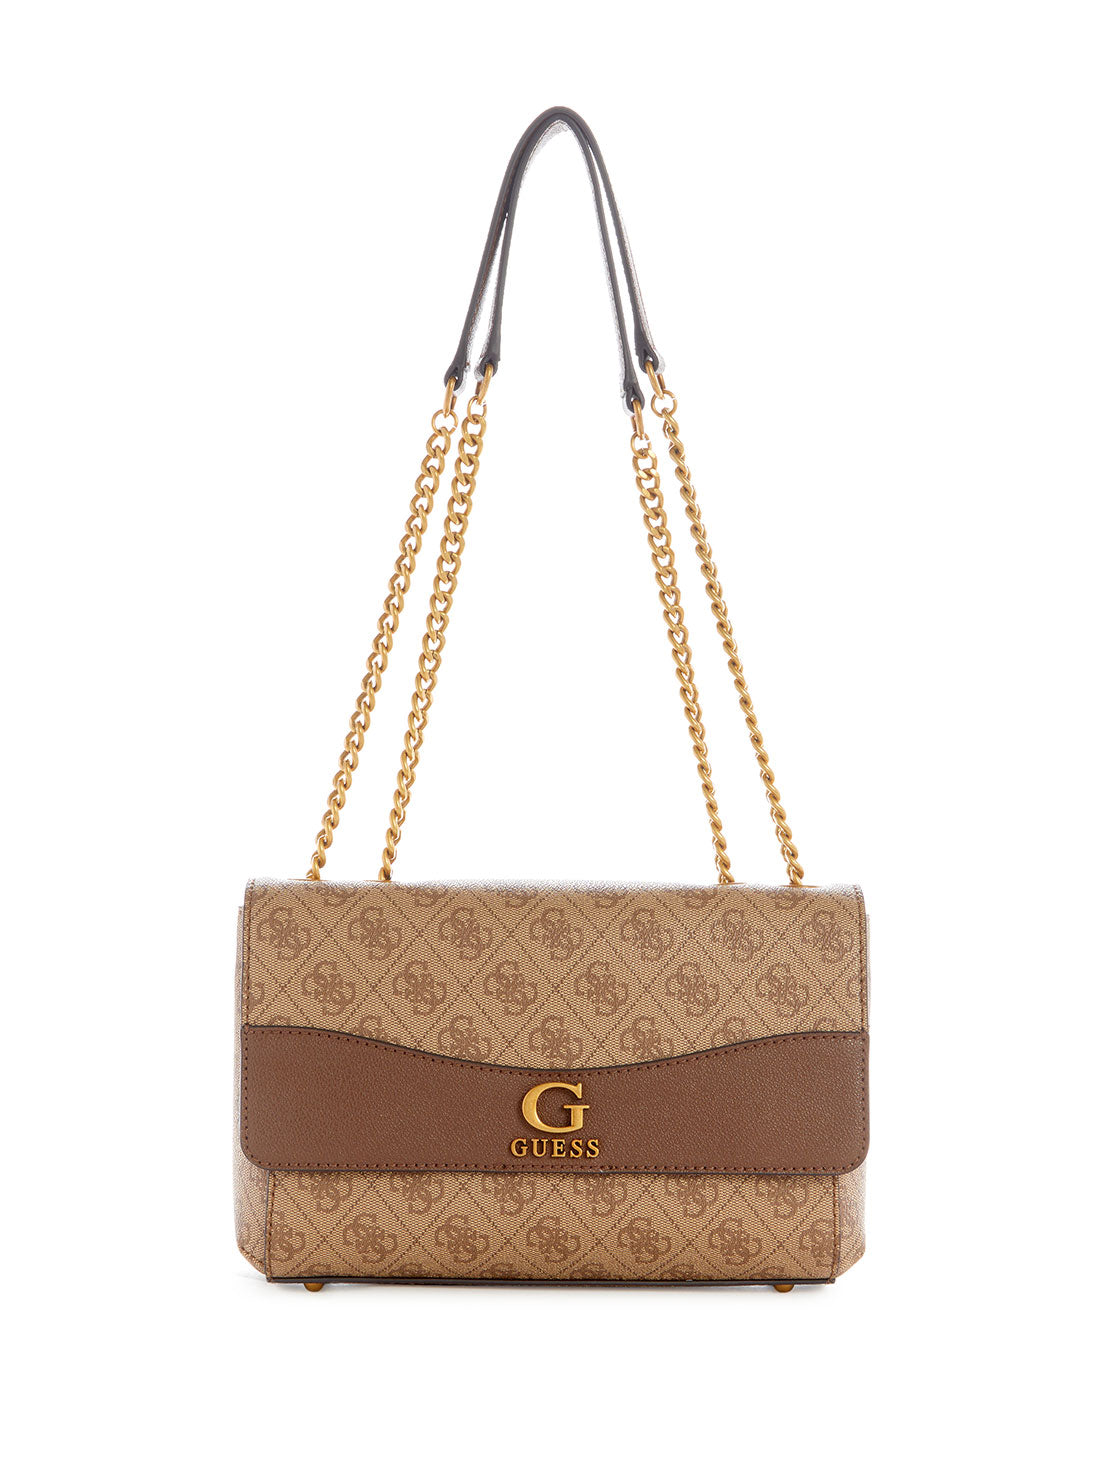 GUESS Women's Brown Logo Nell Crossbody Bag SB873521 Front View